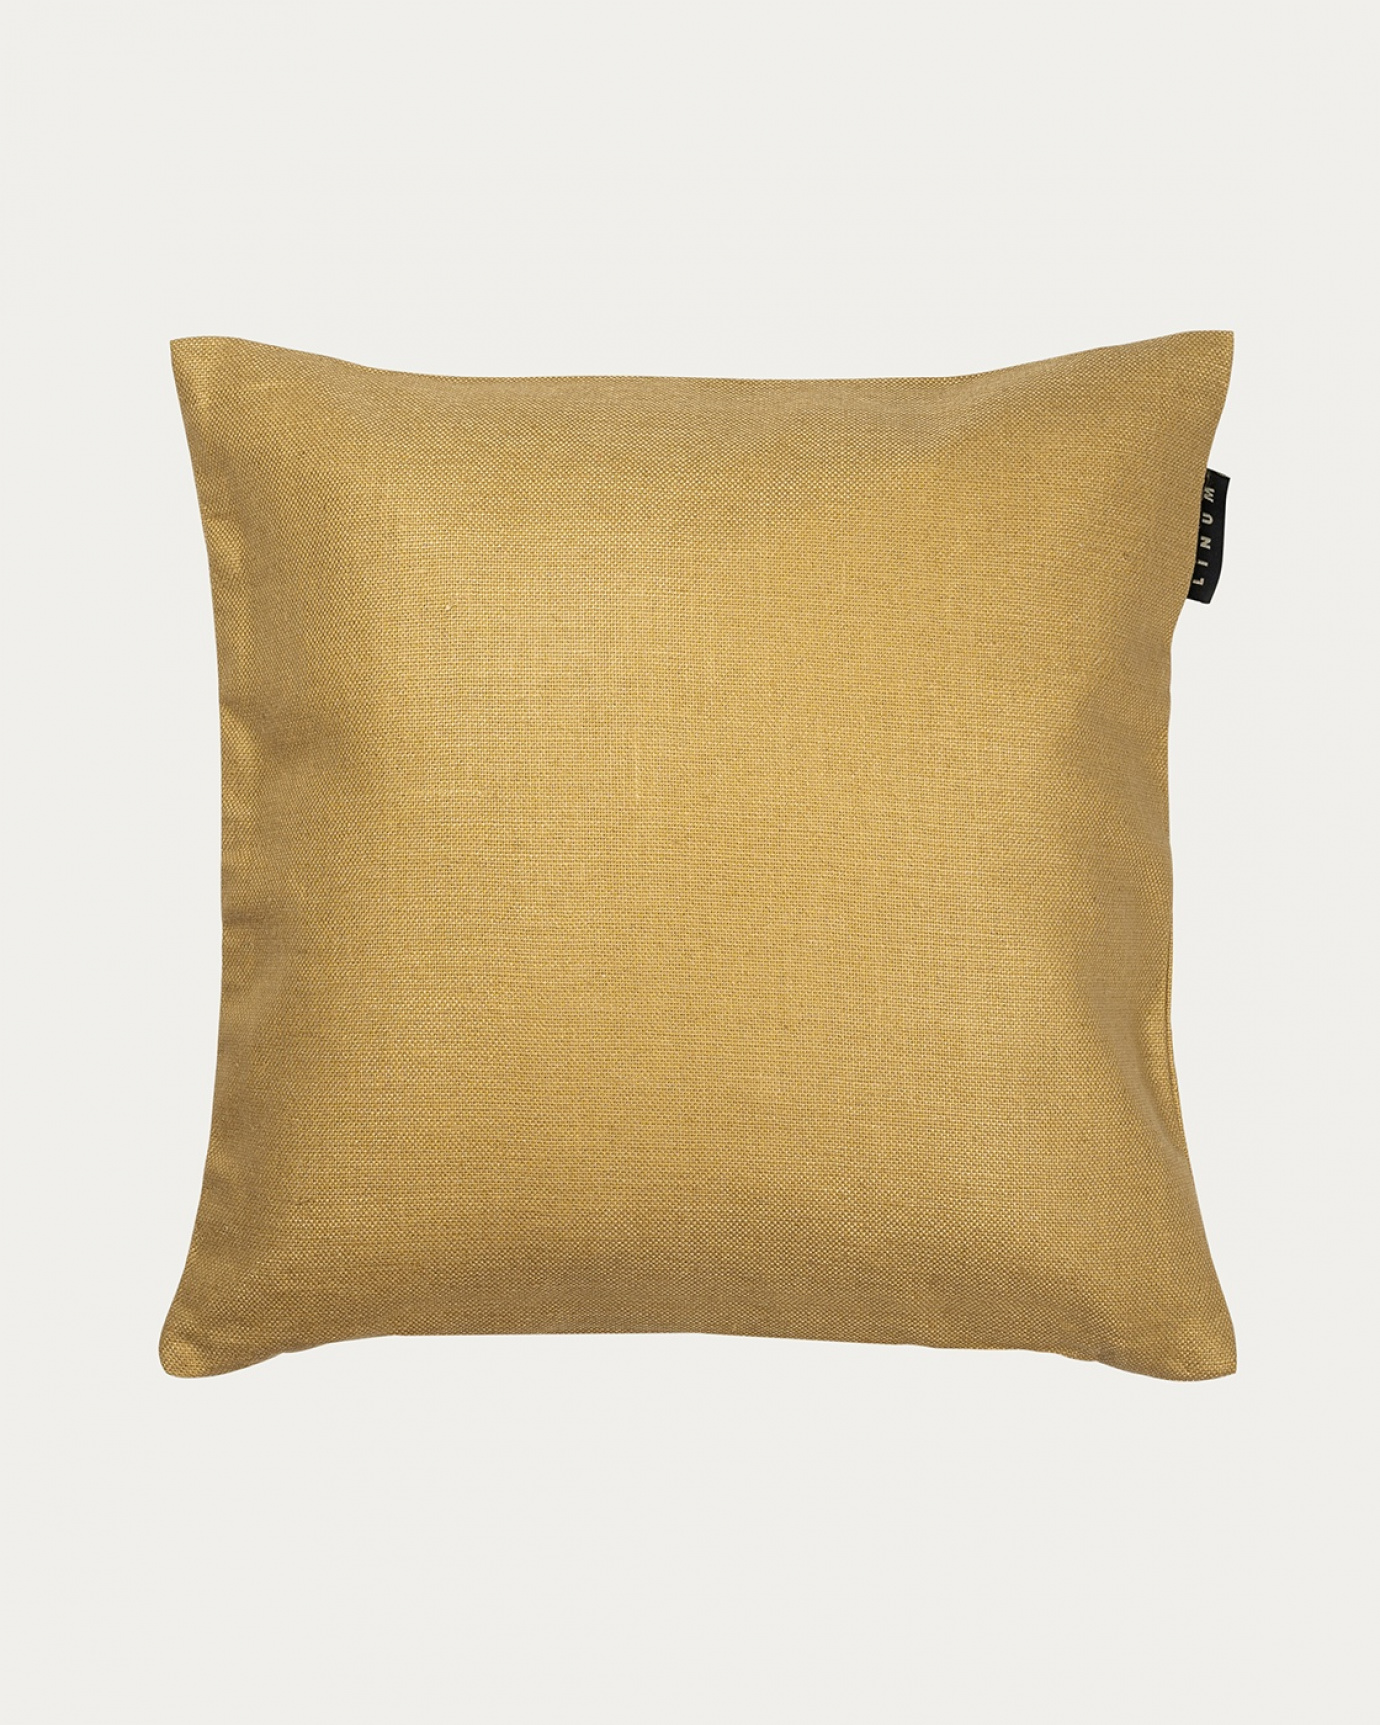 Product image straw yellow SETA cushion cover made of 100% raw silk that gives a nice lustre from LINUM DESIGN. Size 50x50 cm.